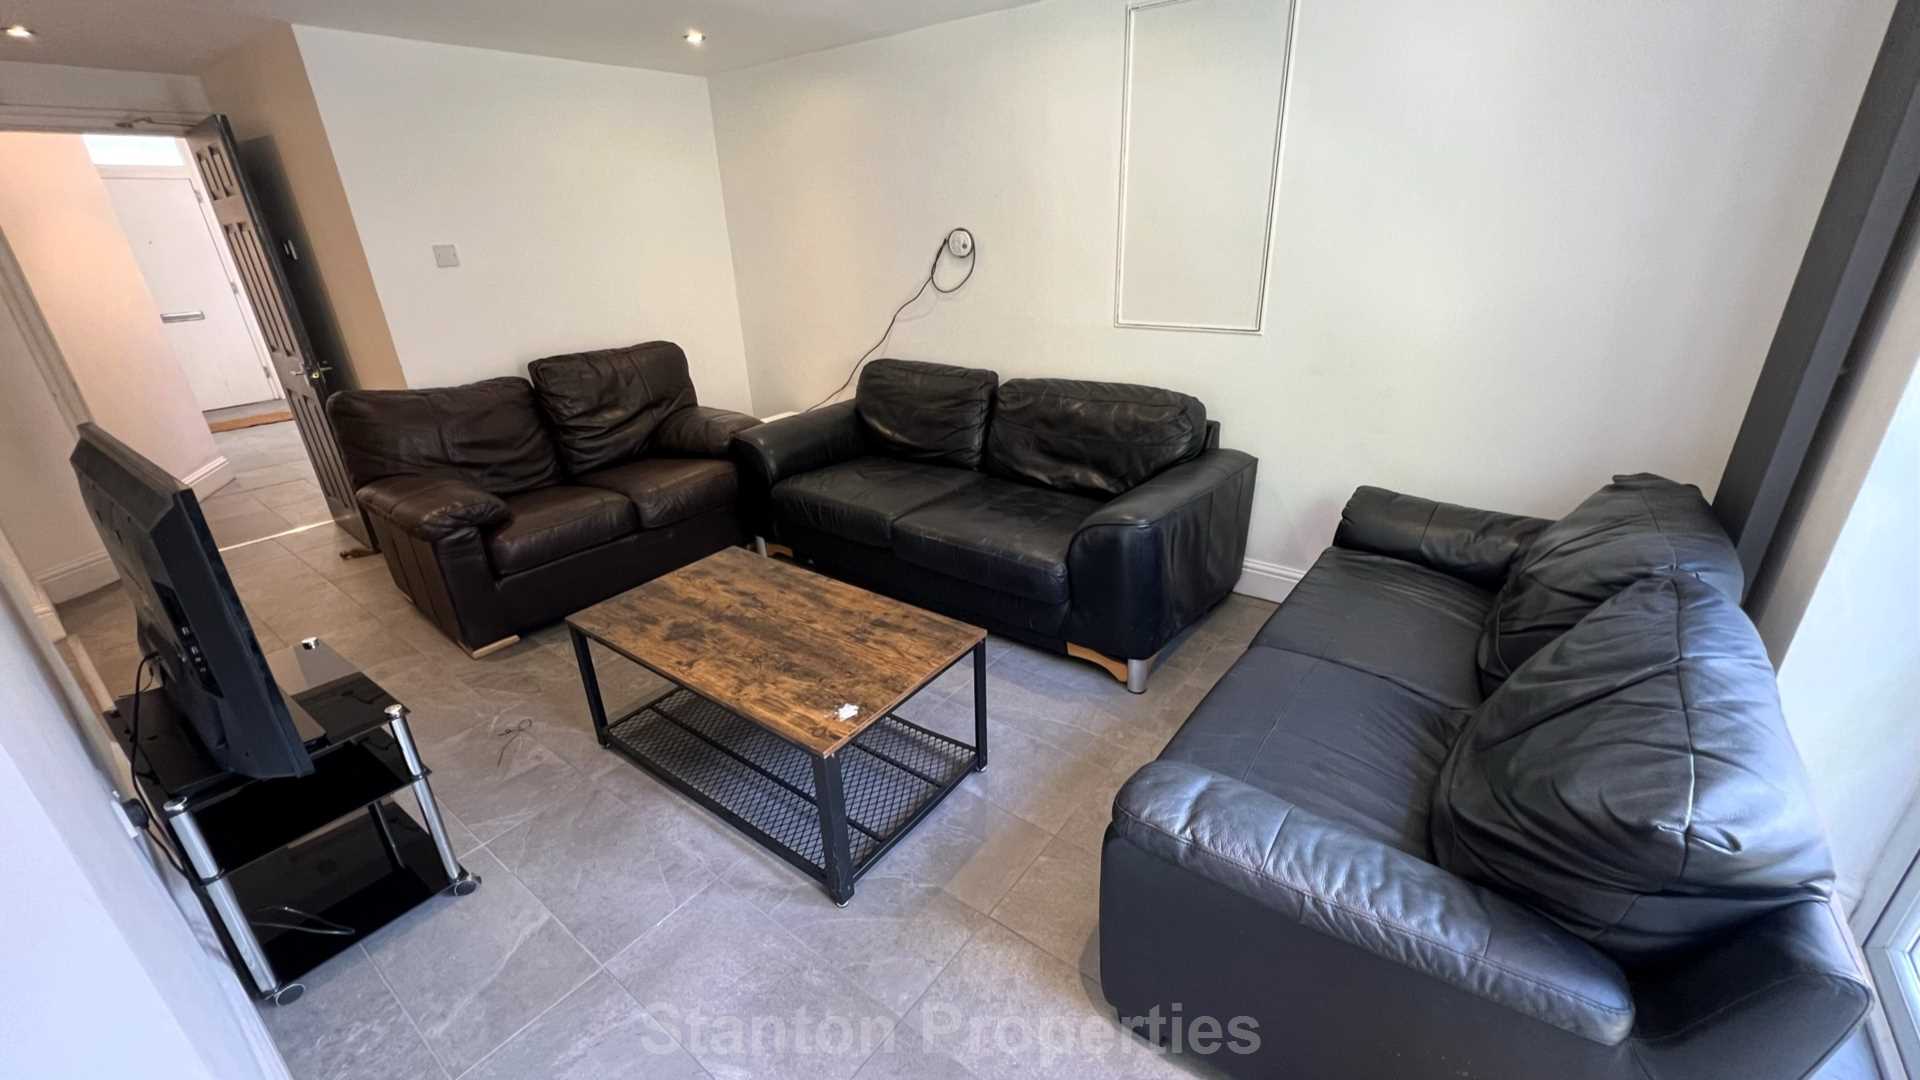 £145 pppw, Linden Grove, Fallowfield, Image 7